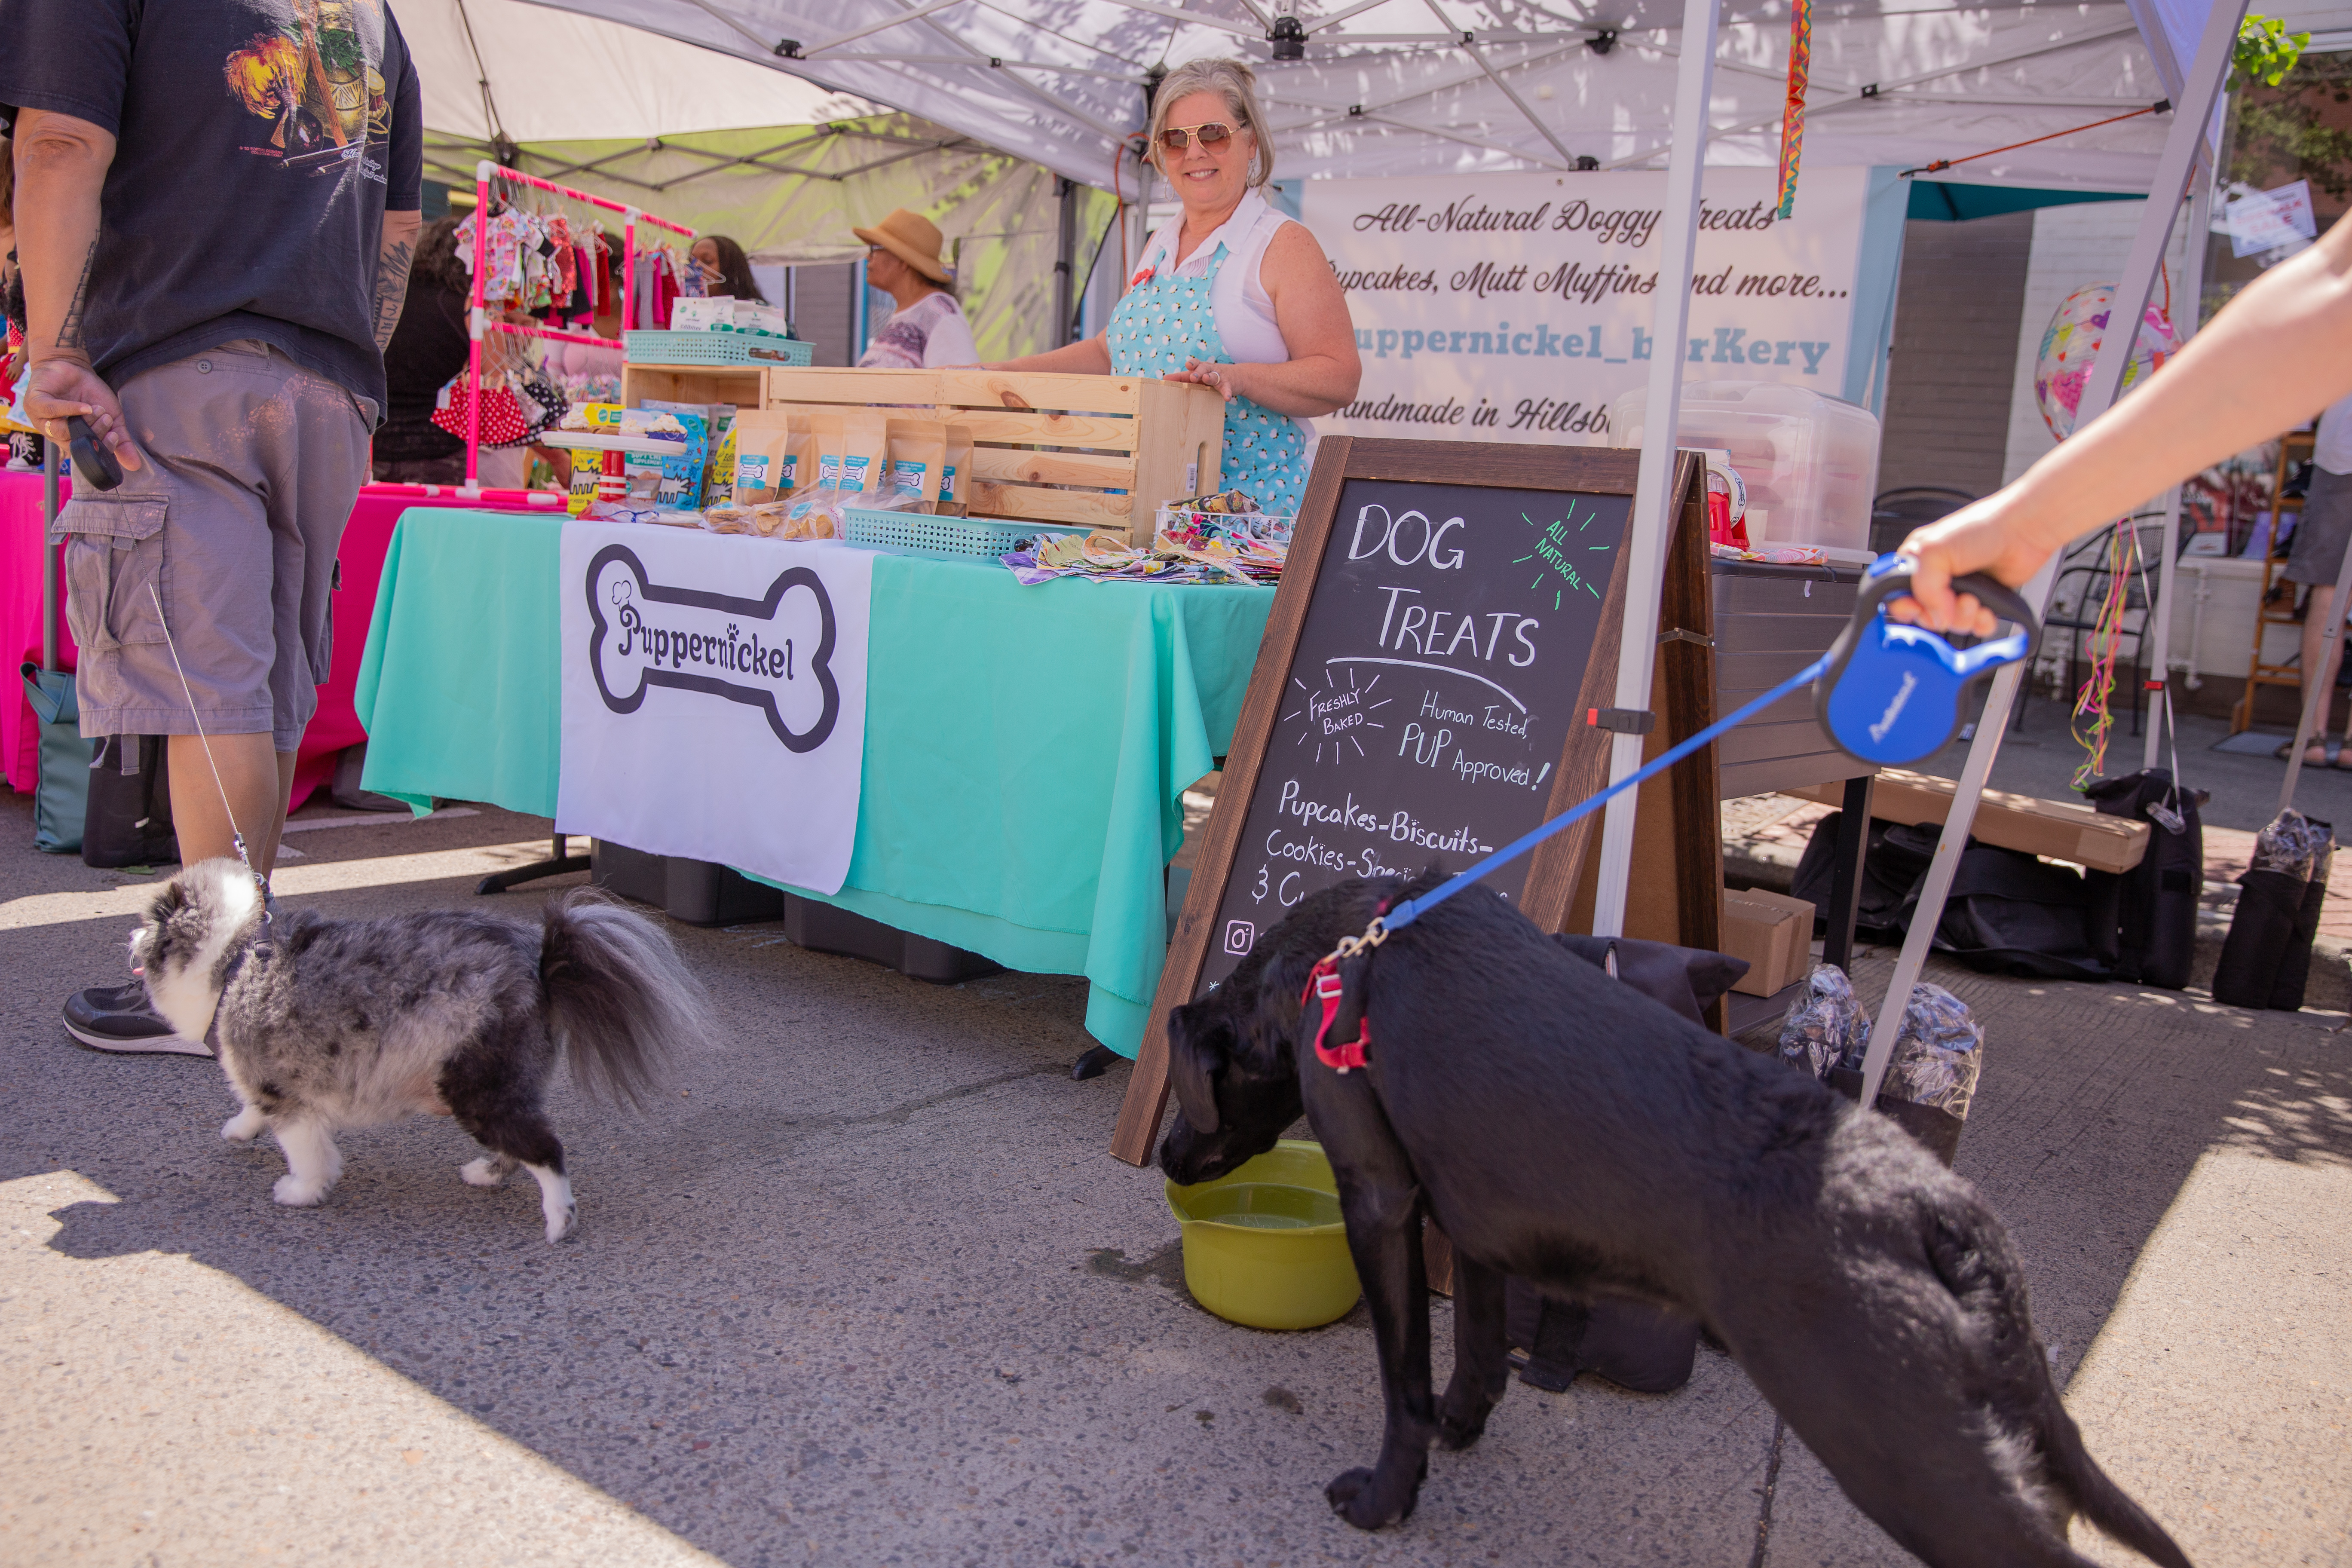 Krystal, the owner of Pumpernickel, stands in her booth full of treats for dogs at the Farmers Market, smiling at a black dog stretching it's neck to reach the bowl of water she's provided. 